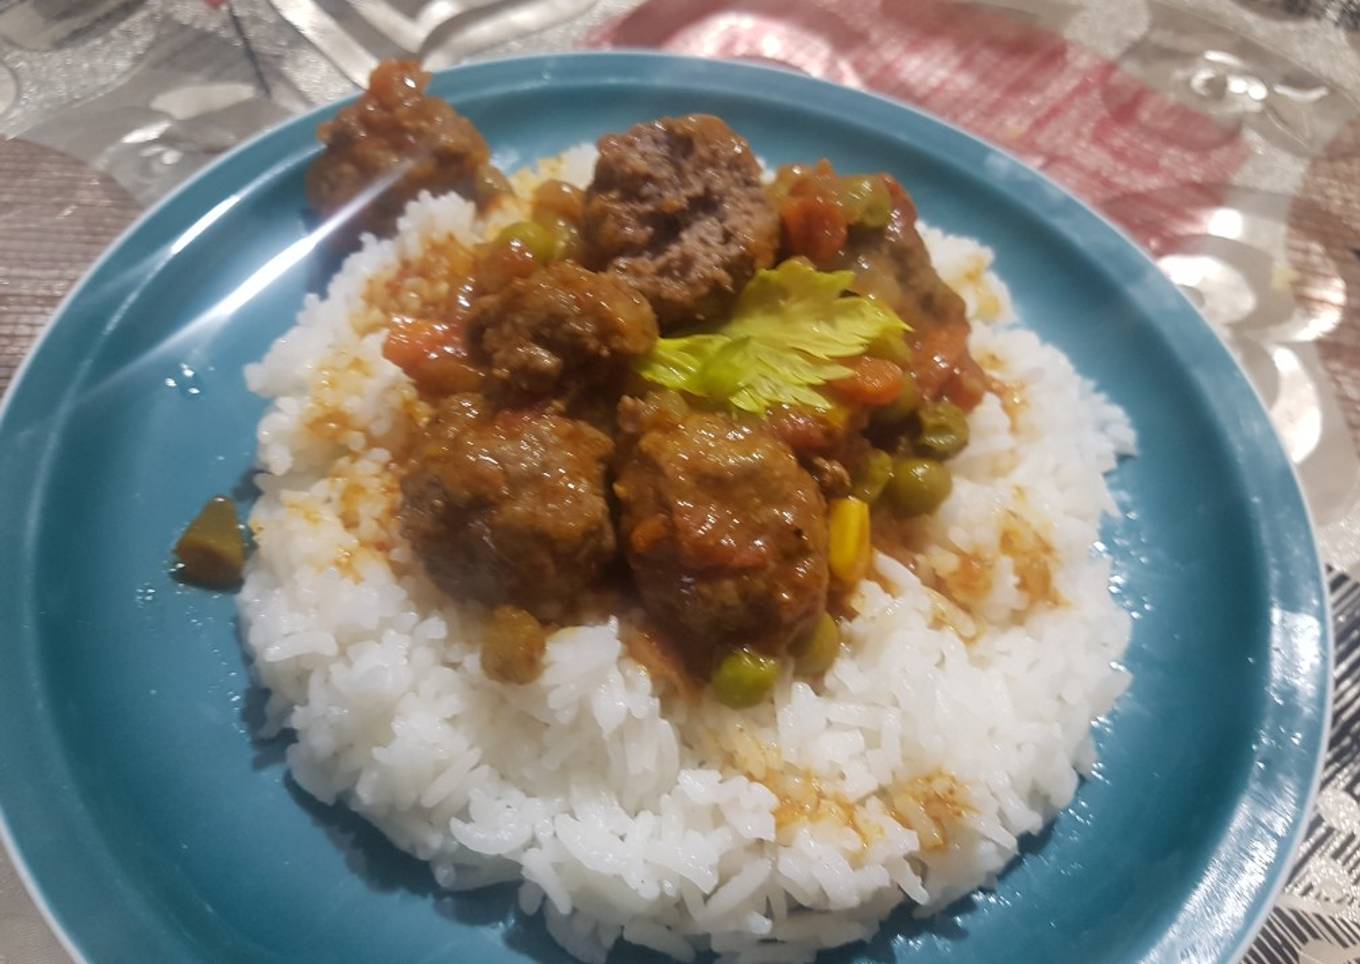 Rice and beef rounds in sauce